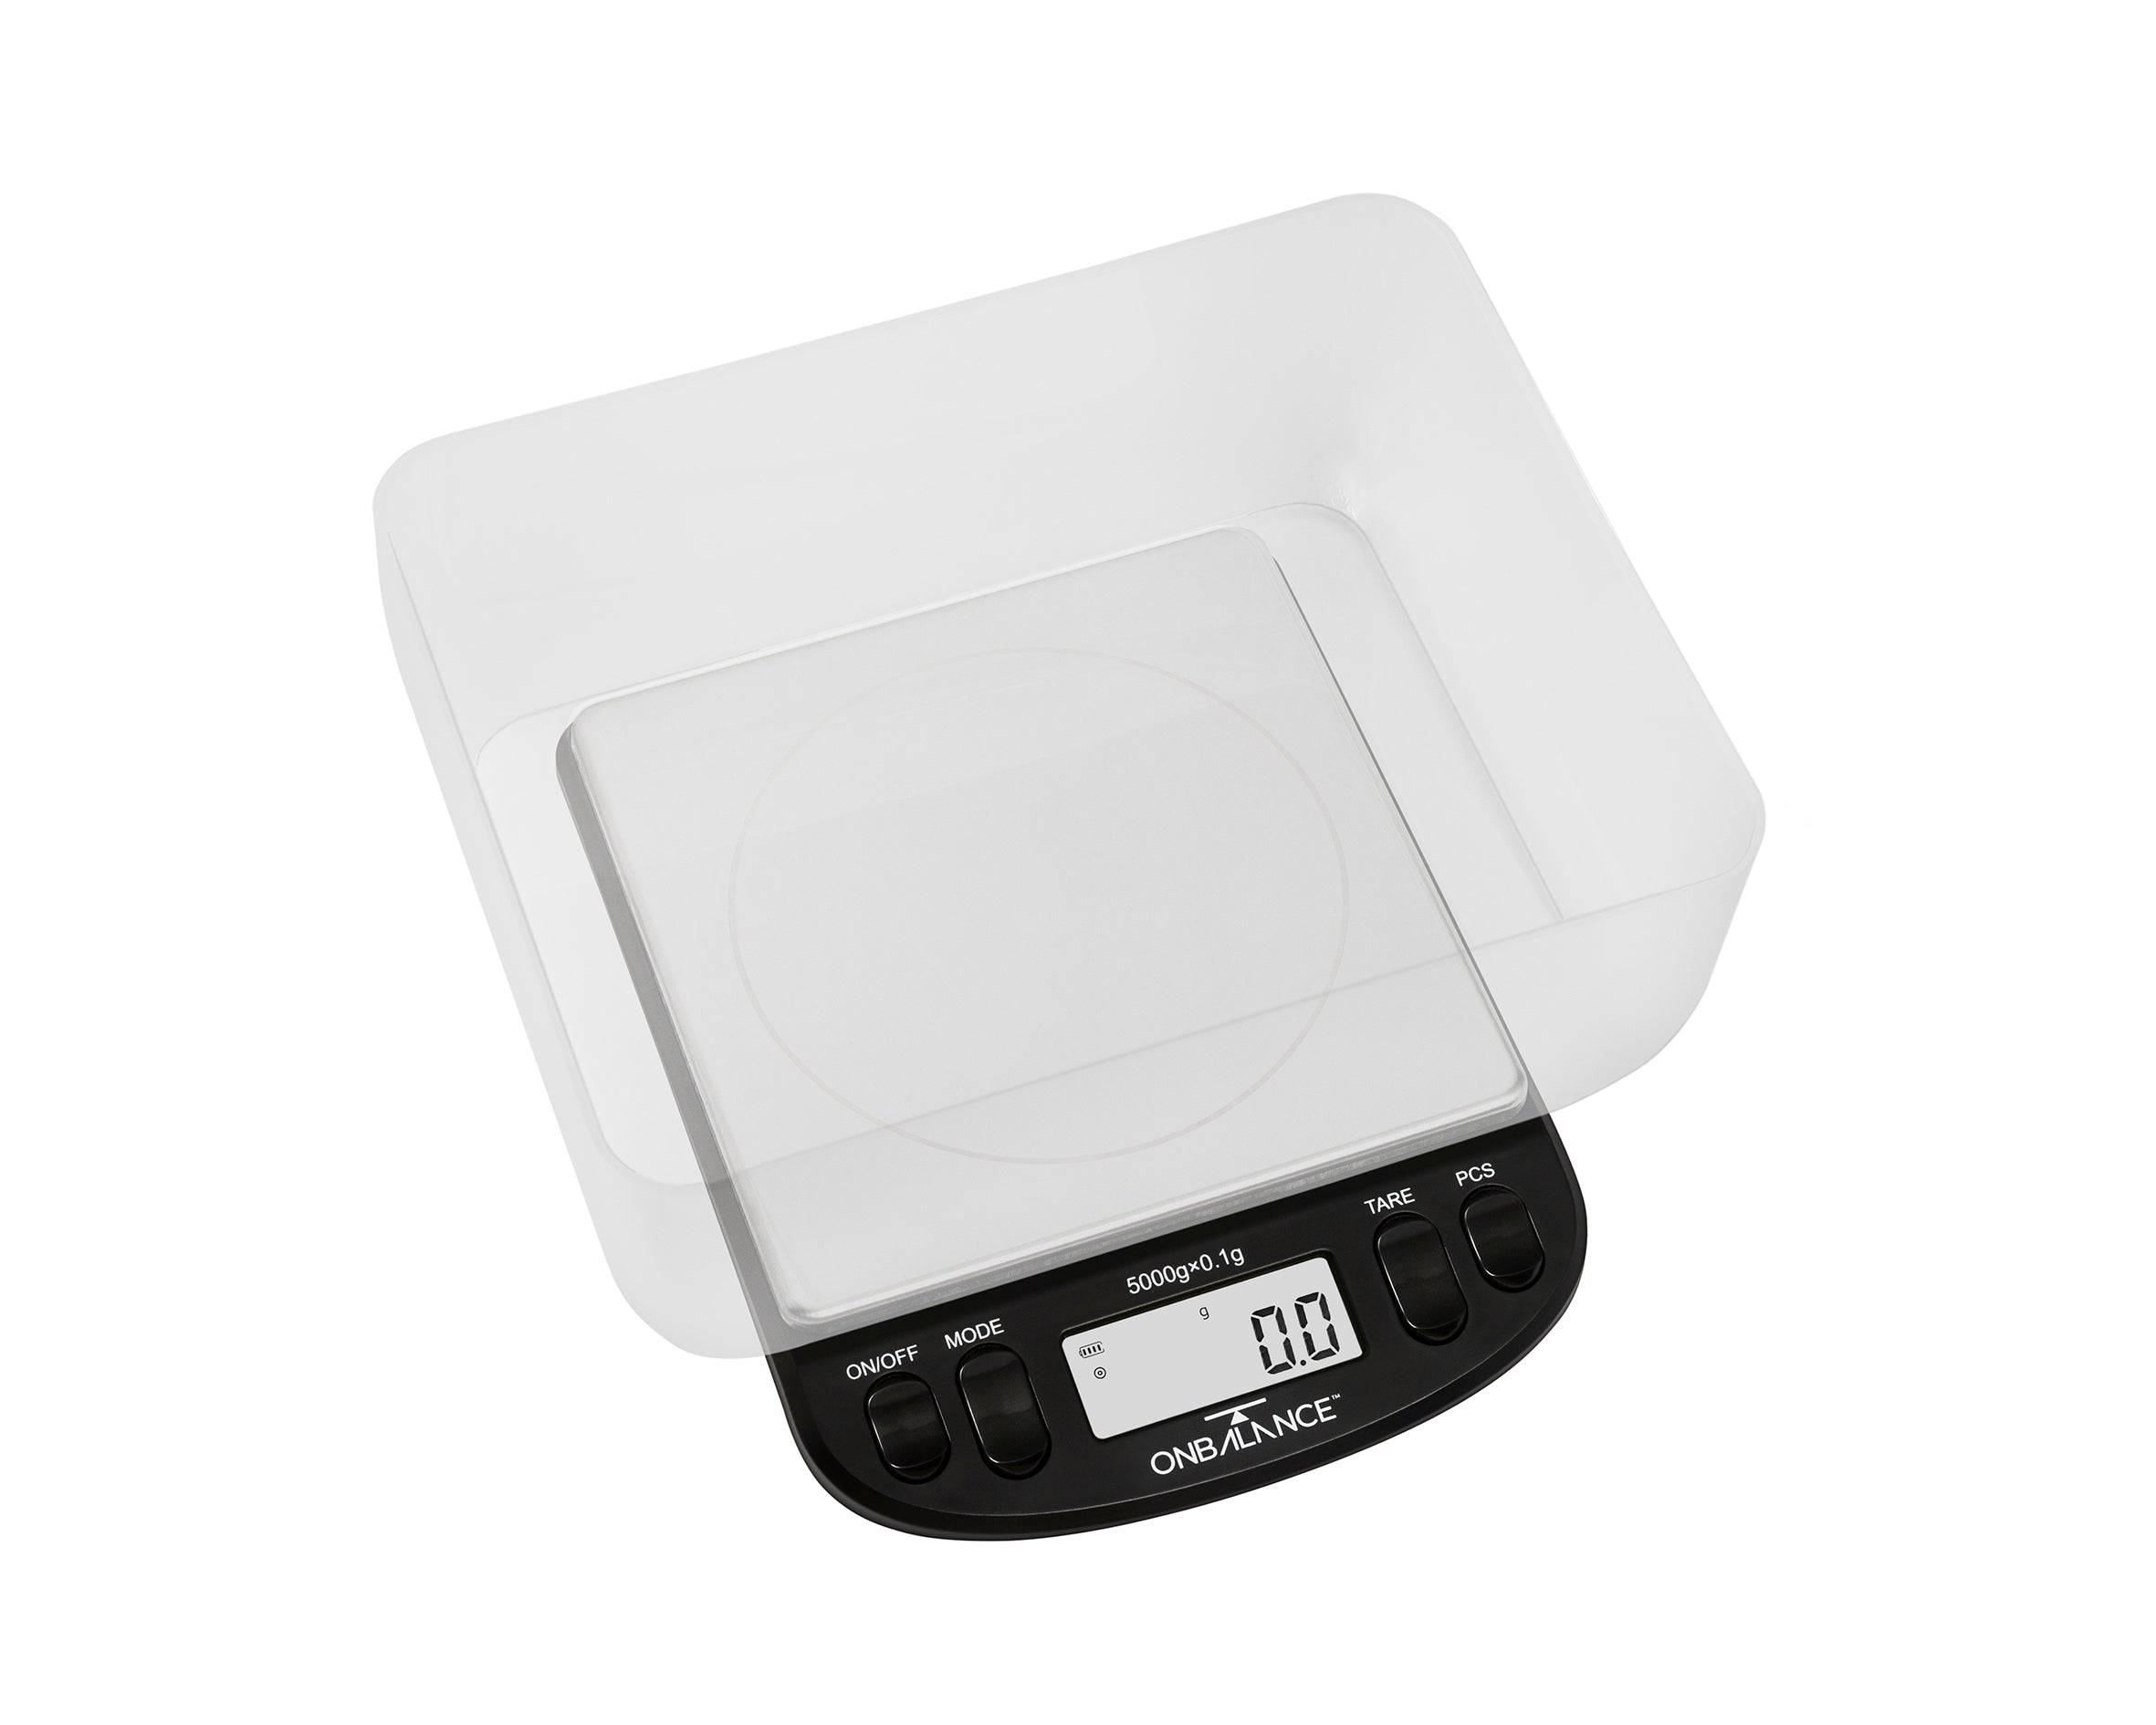 IS-5KG-BK Intrepid Series Compact Bench Scale - 5000g x 0.1g